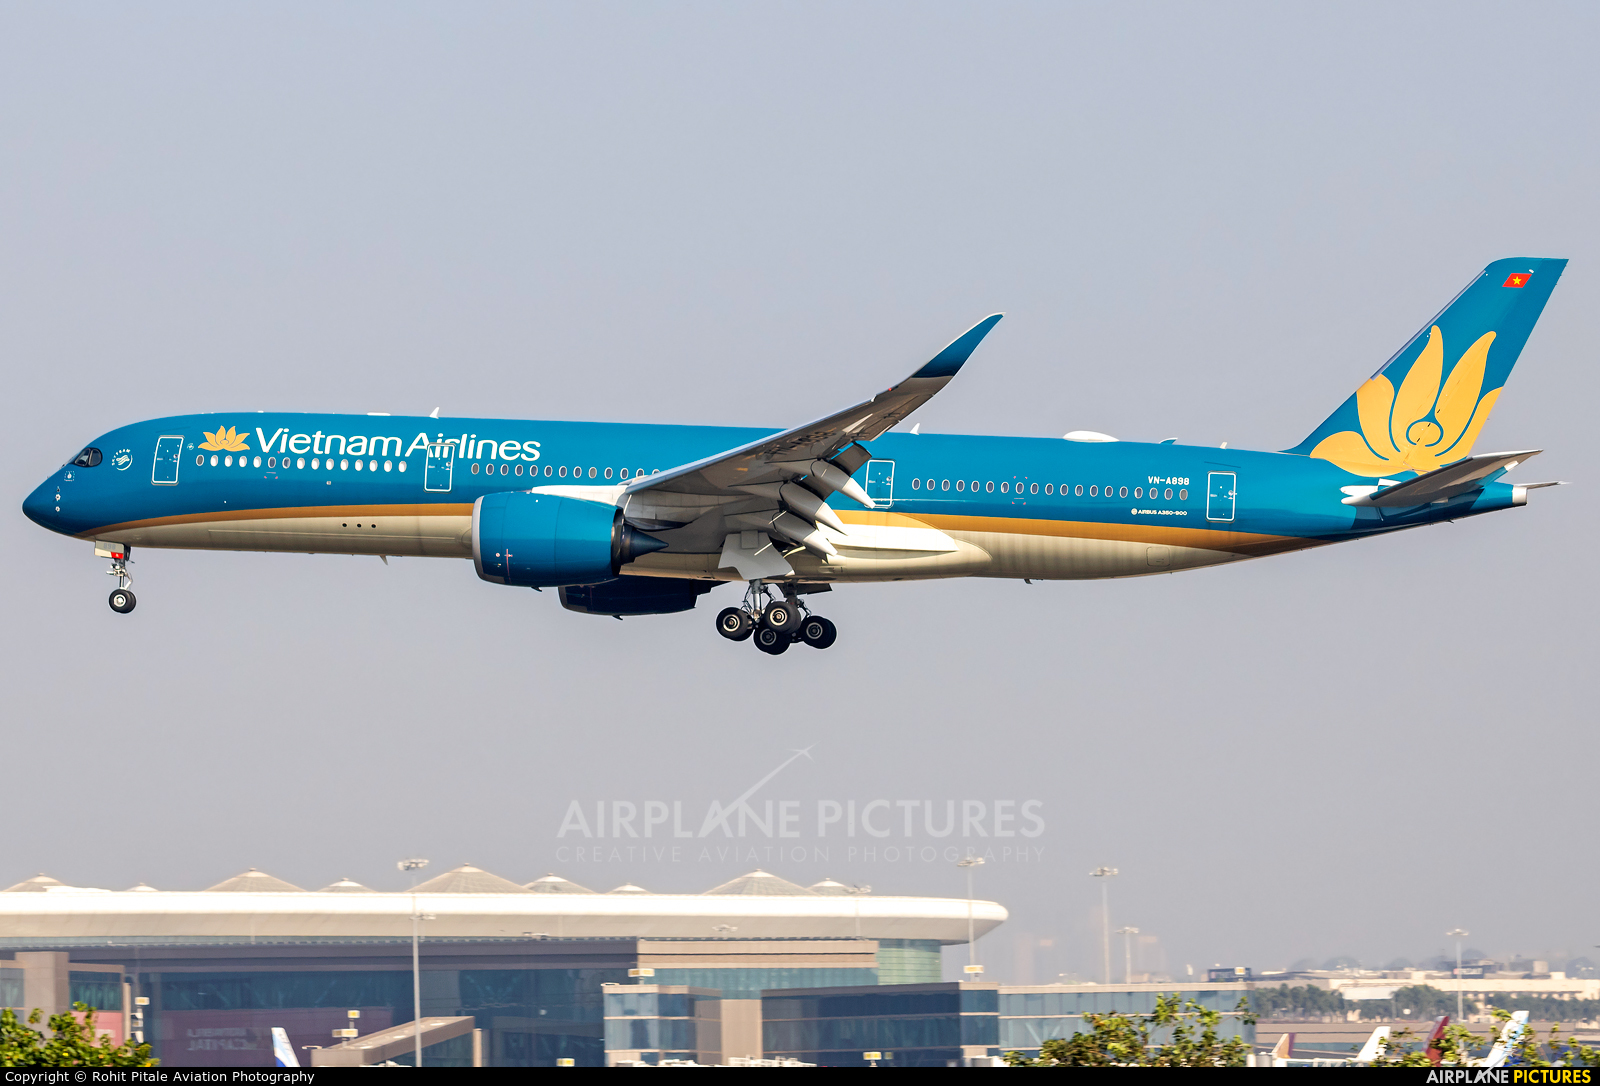 Vn A8 Vietnam Airlines Airbus A350 900 At Mumbai Chhatrapati Shivaji Intl Photo Id Airplane Pictures Net